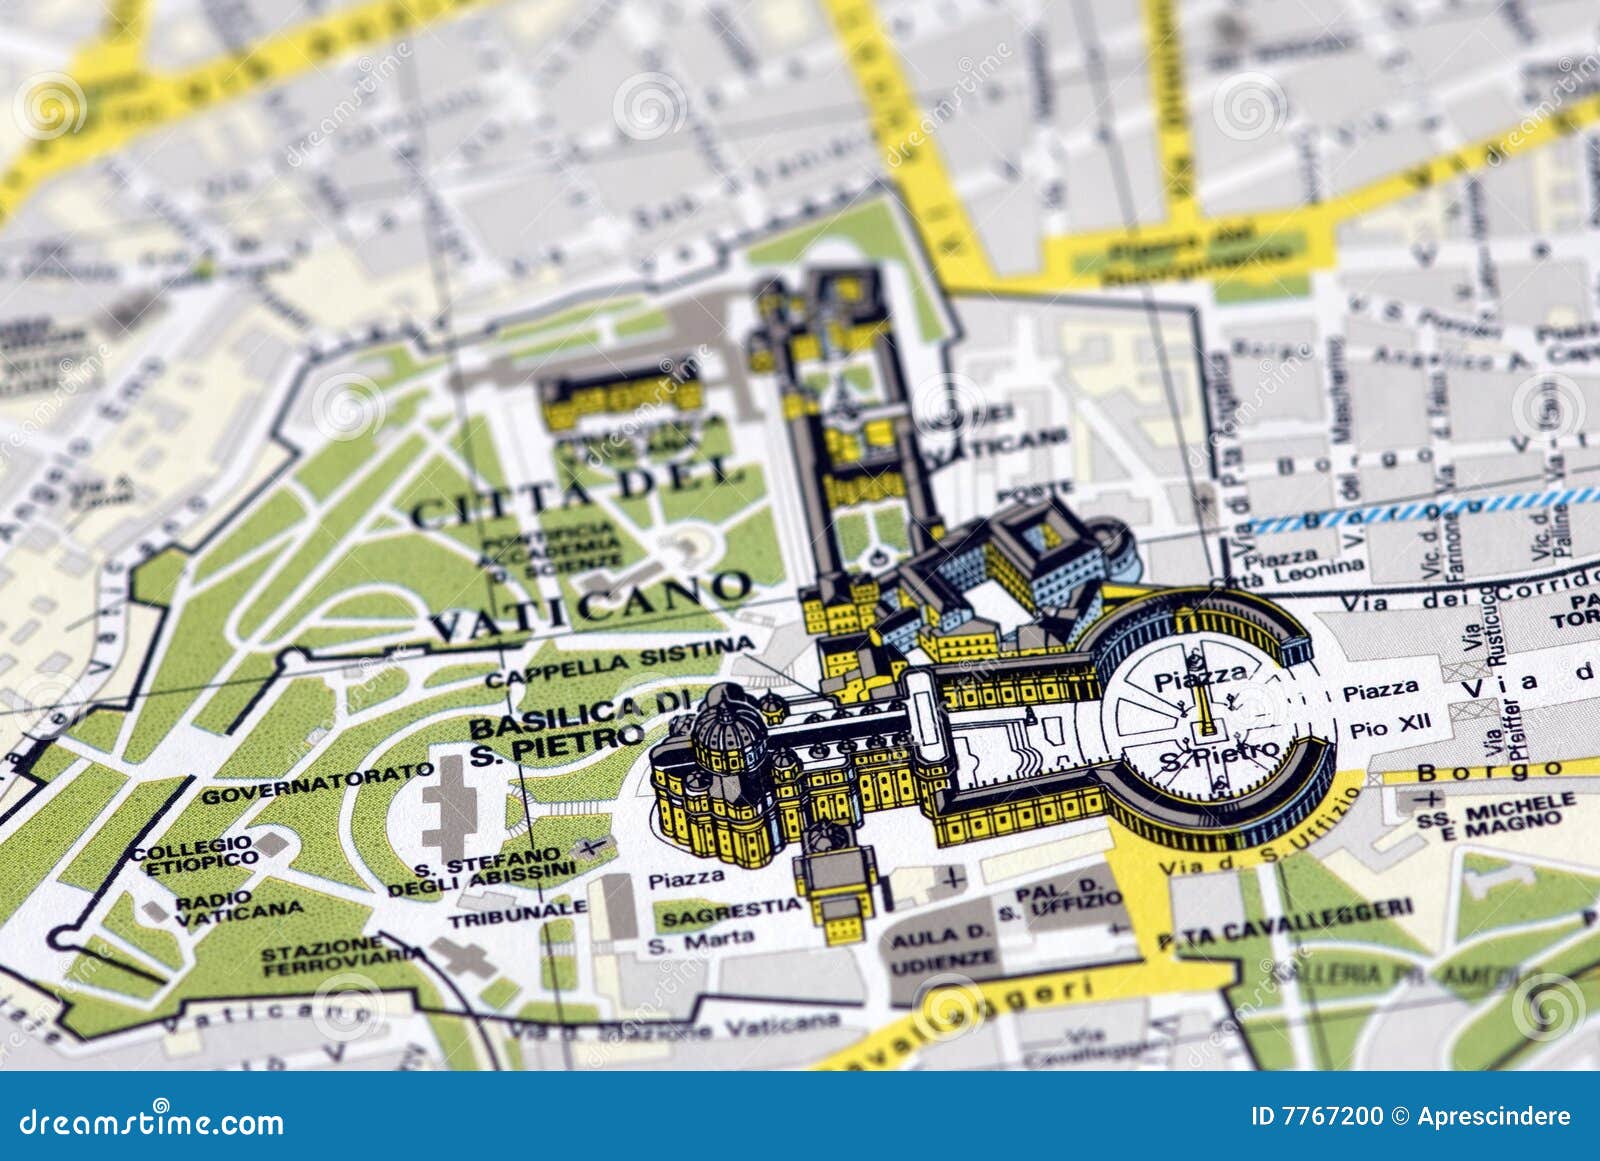 Vatican City State Map New Postcard 